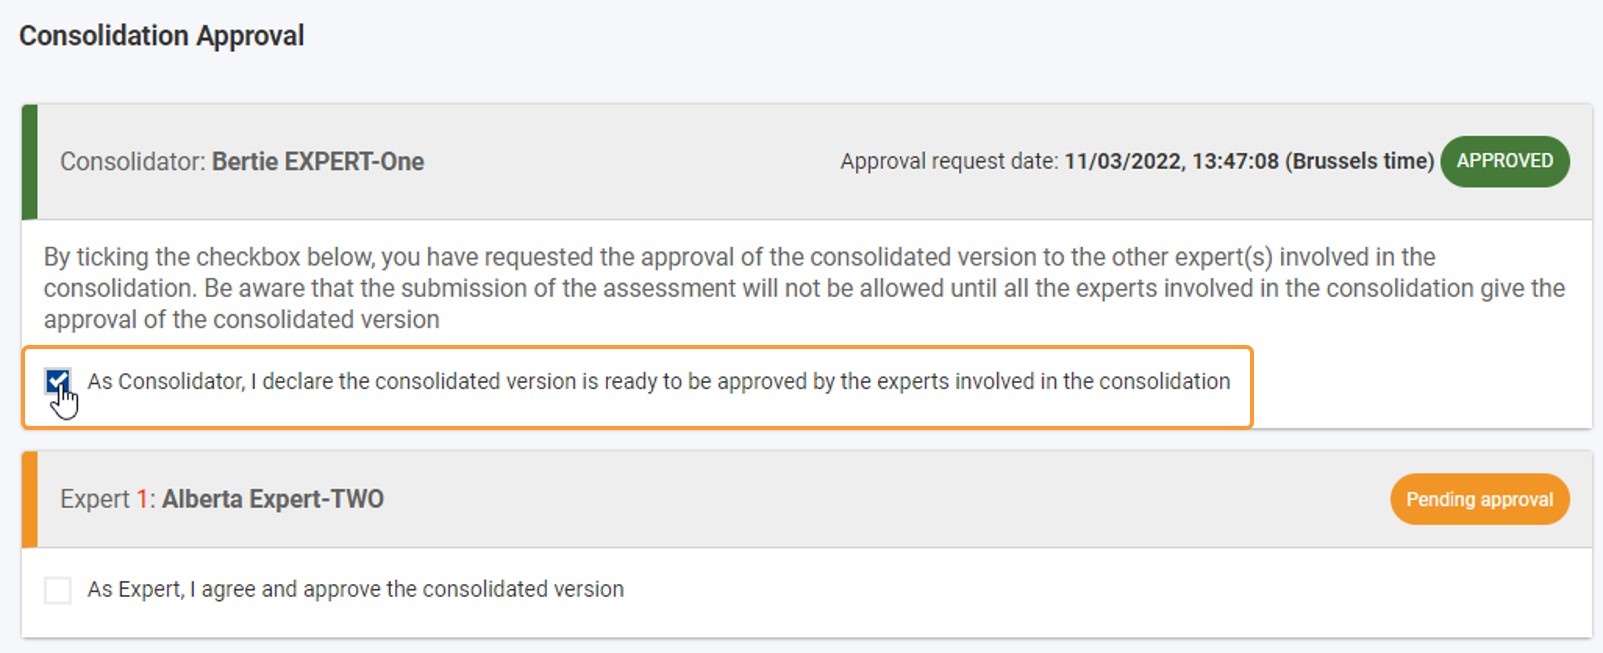 Untick the consolidator approval tick box